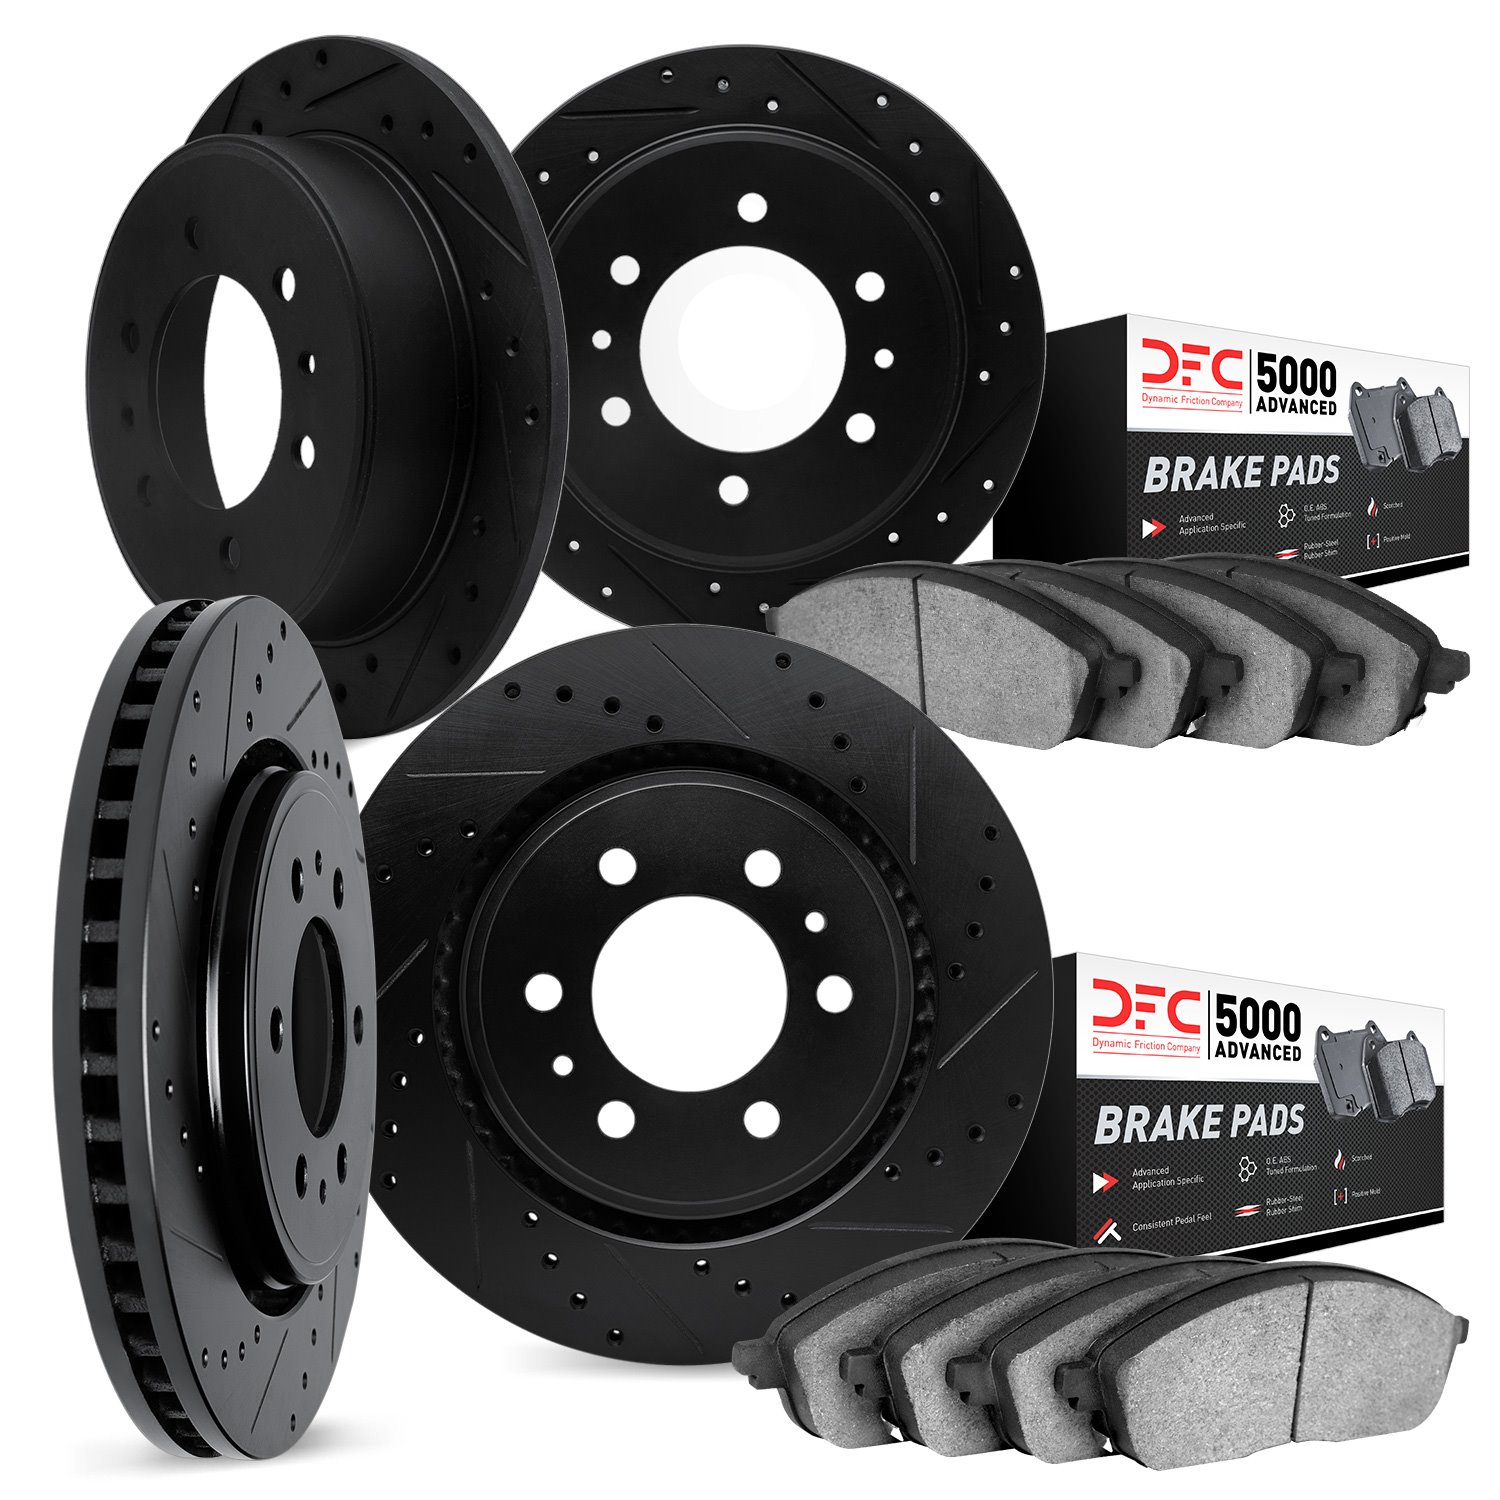 7504-23000 Drilled/Slotted Brake Rotors w/5000 Advanced Brake Pads Kit [Silver], 1972-1979 Renault, Position: Front and Rear